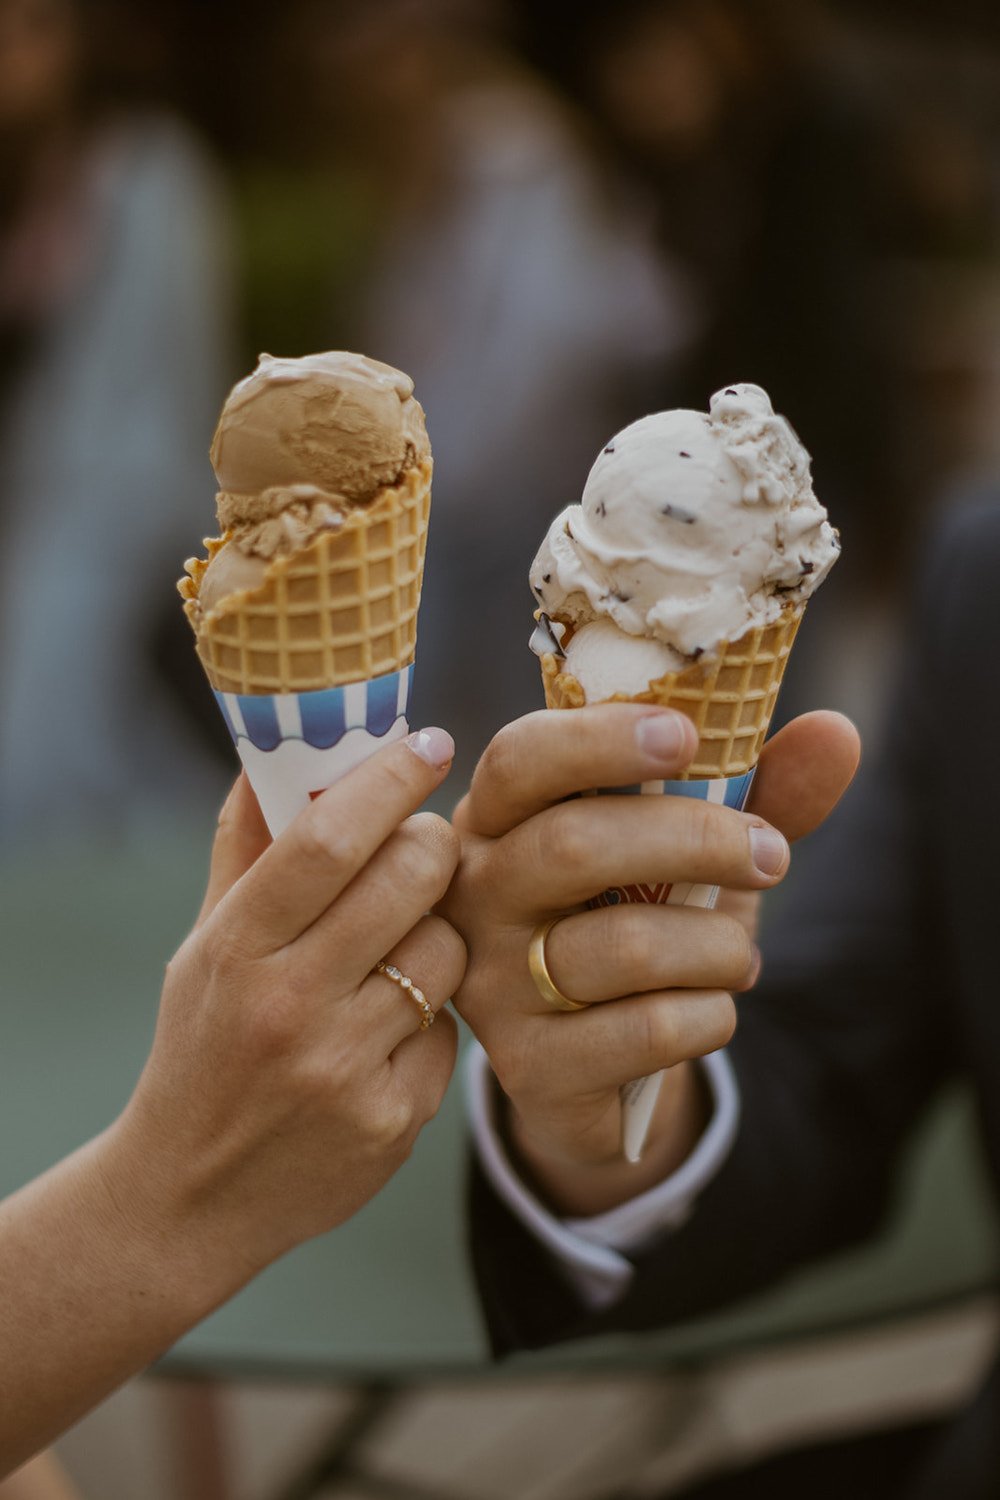 The couple cheers their ice cream cones together.